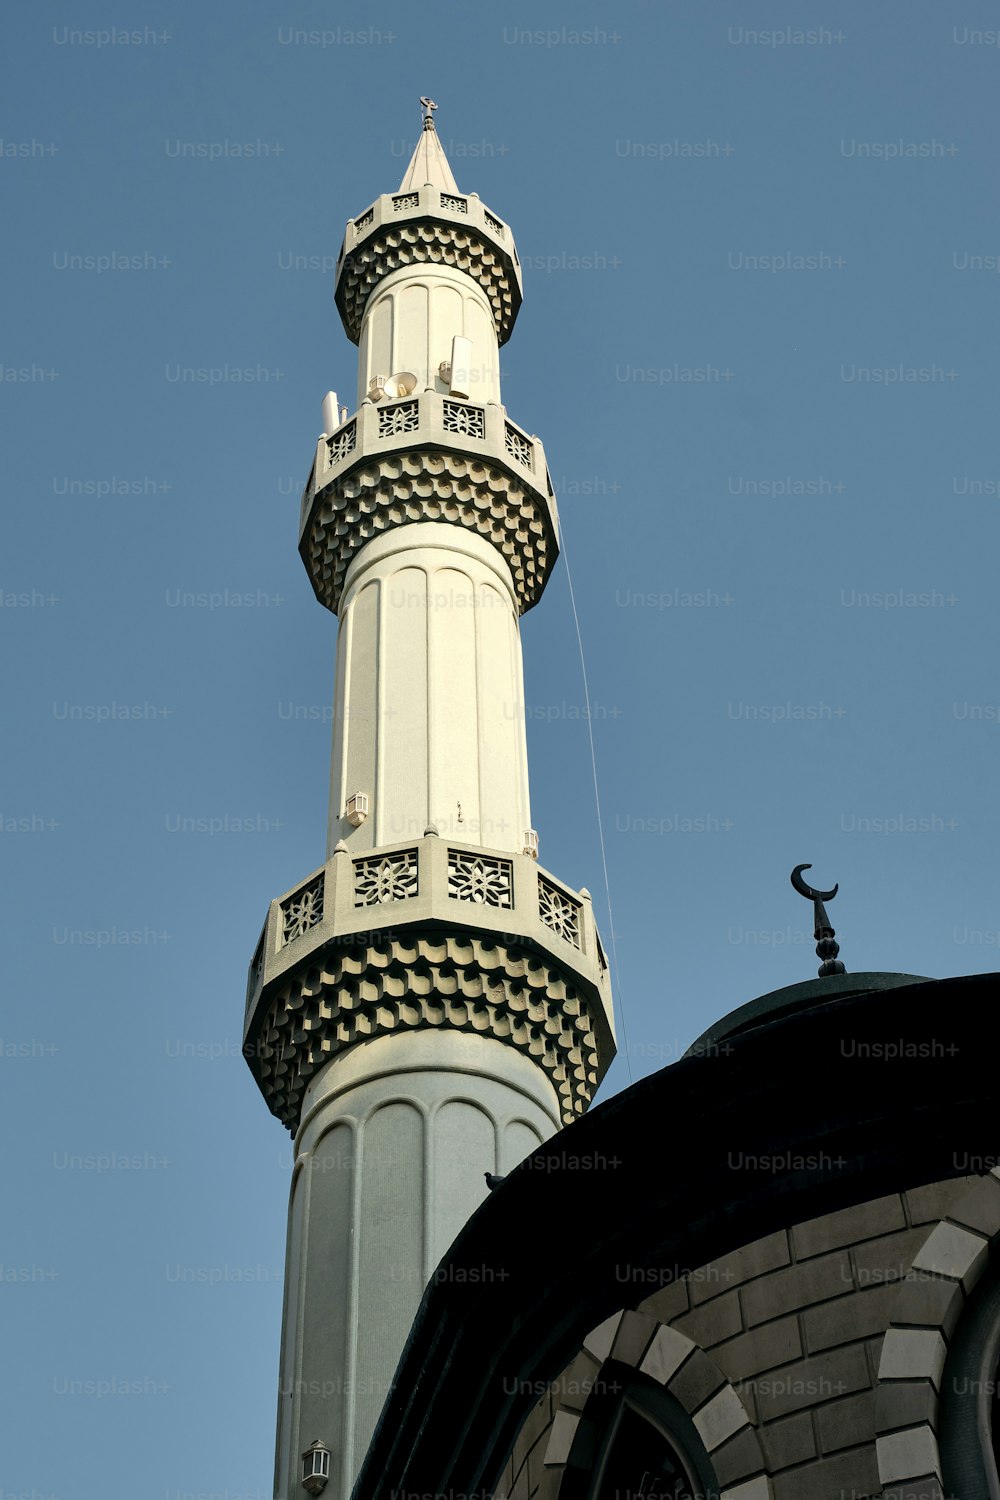 A low-angle shot of a minaret of a mosque against a blue sky on a sunny day in Dubai